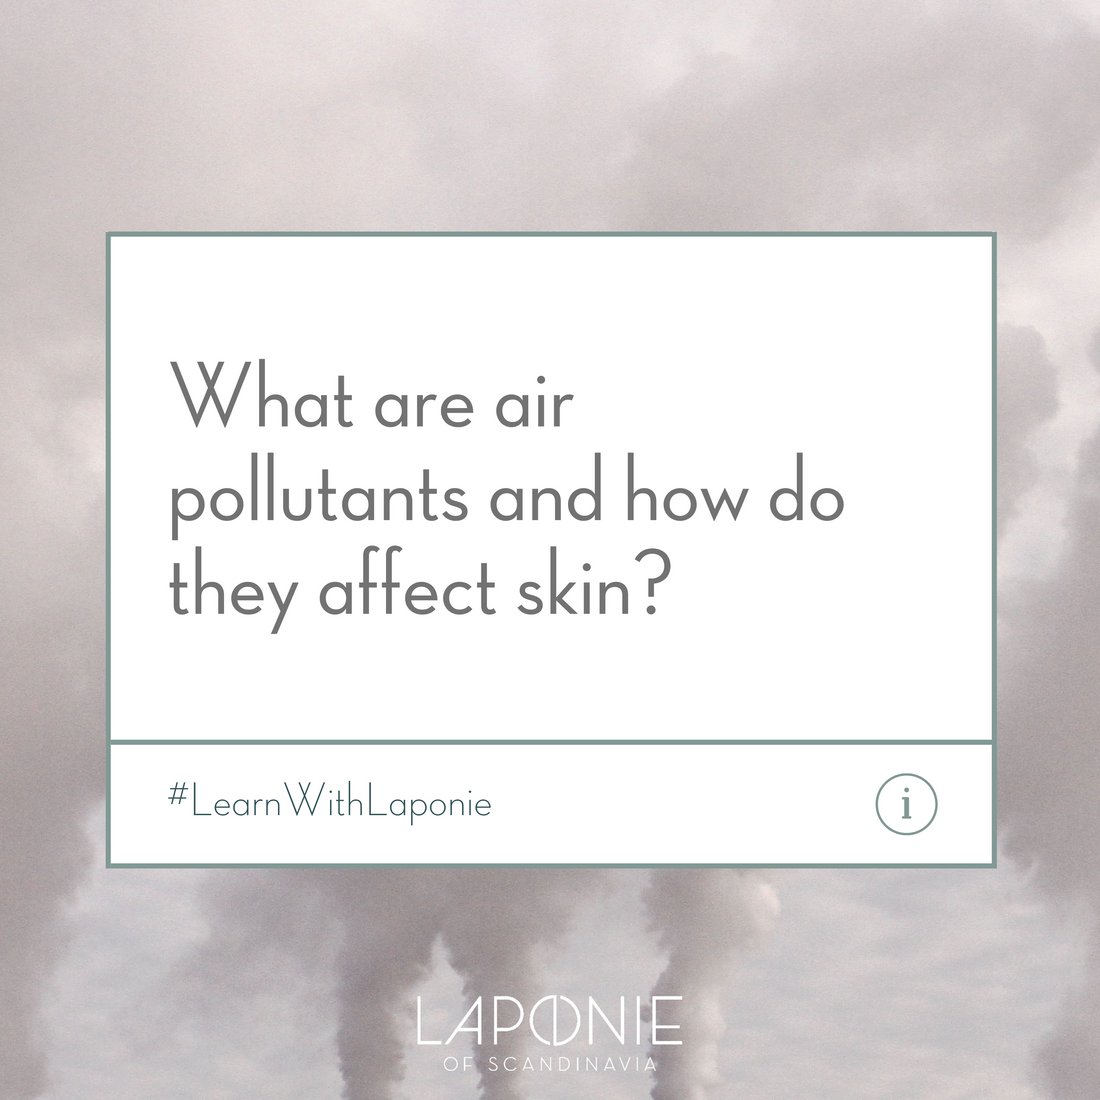 Part 1/3: What are air pollutants and how do they affect skin?